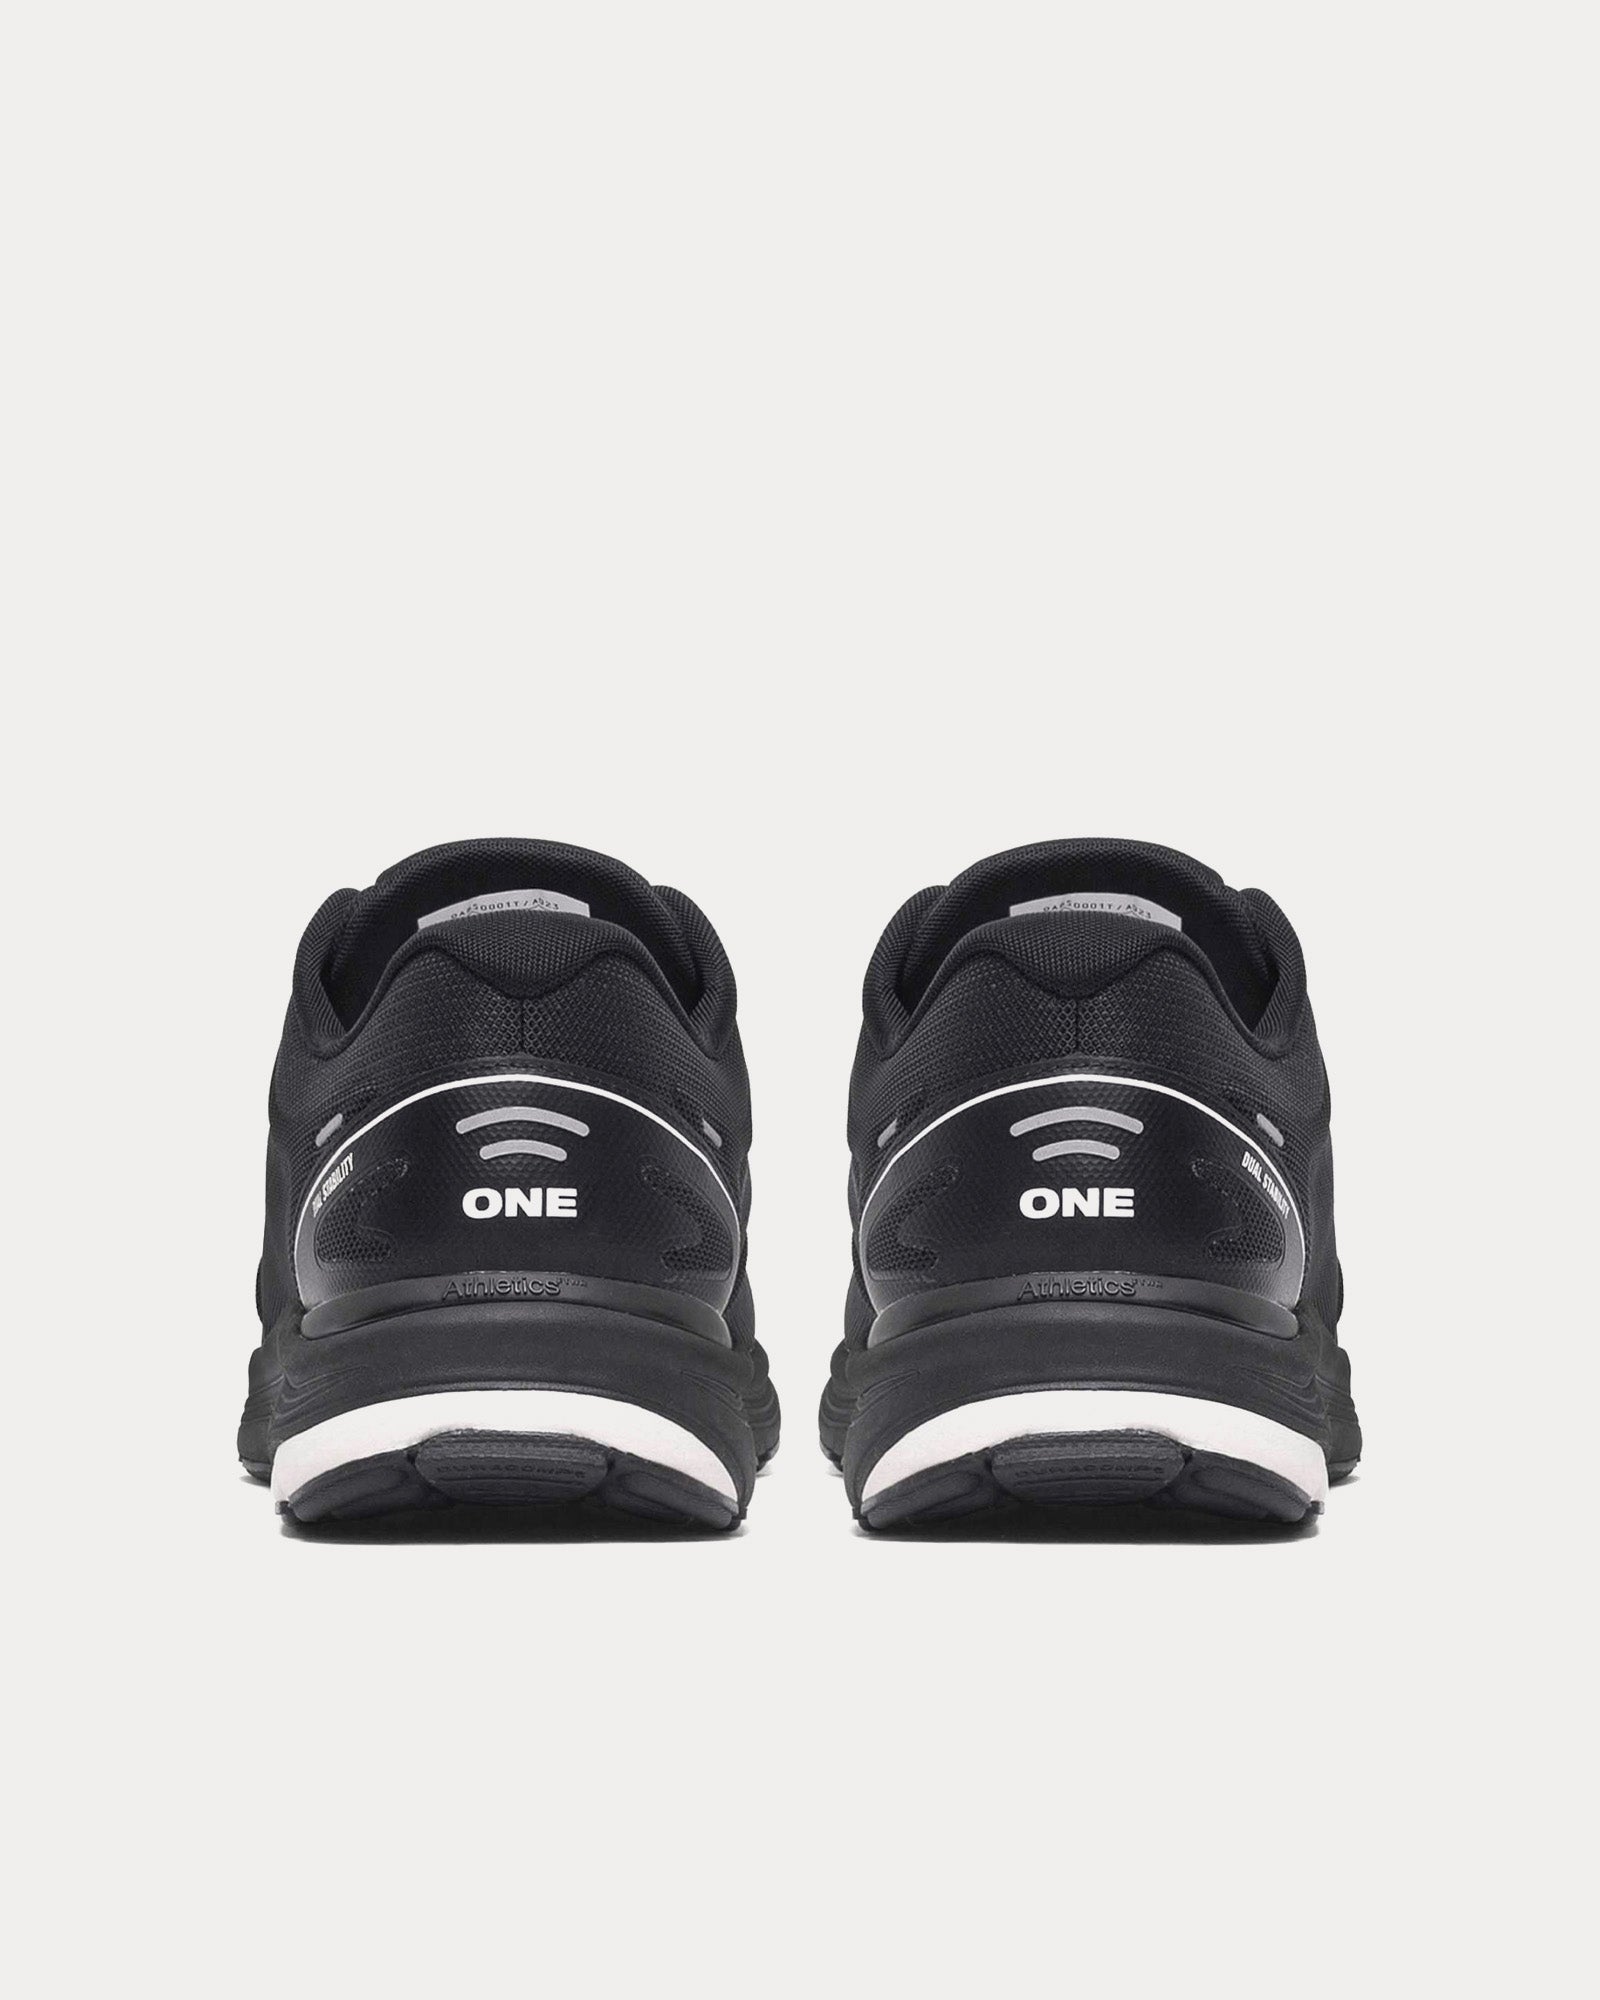 Athletics FTWR - One Remastered Black Low Top Sneakers